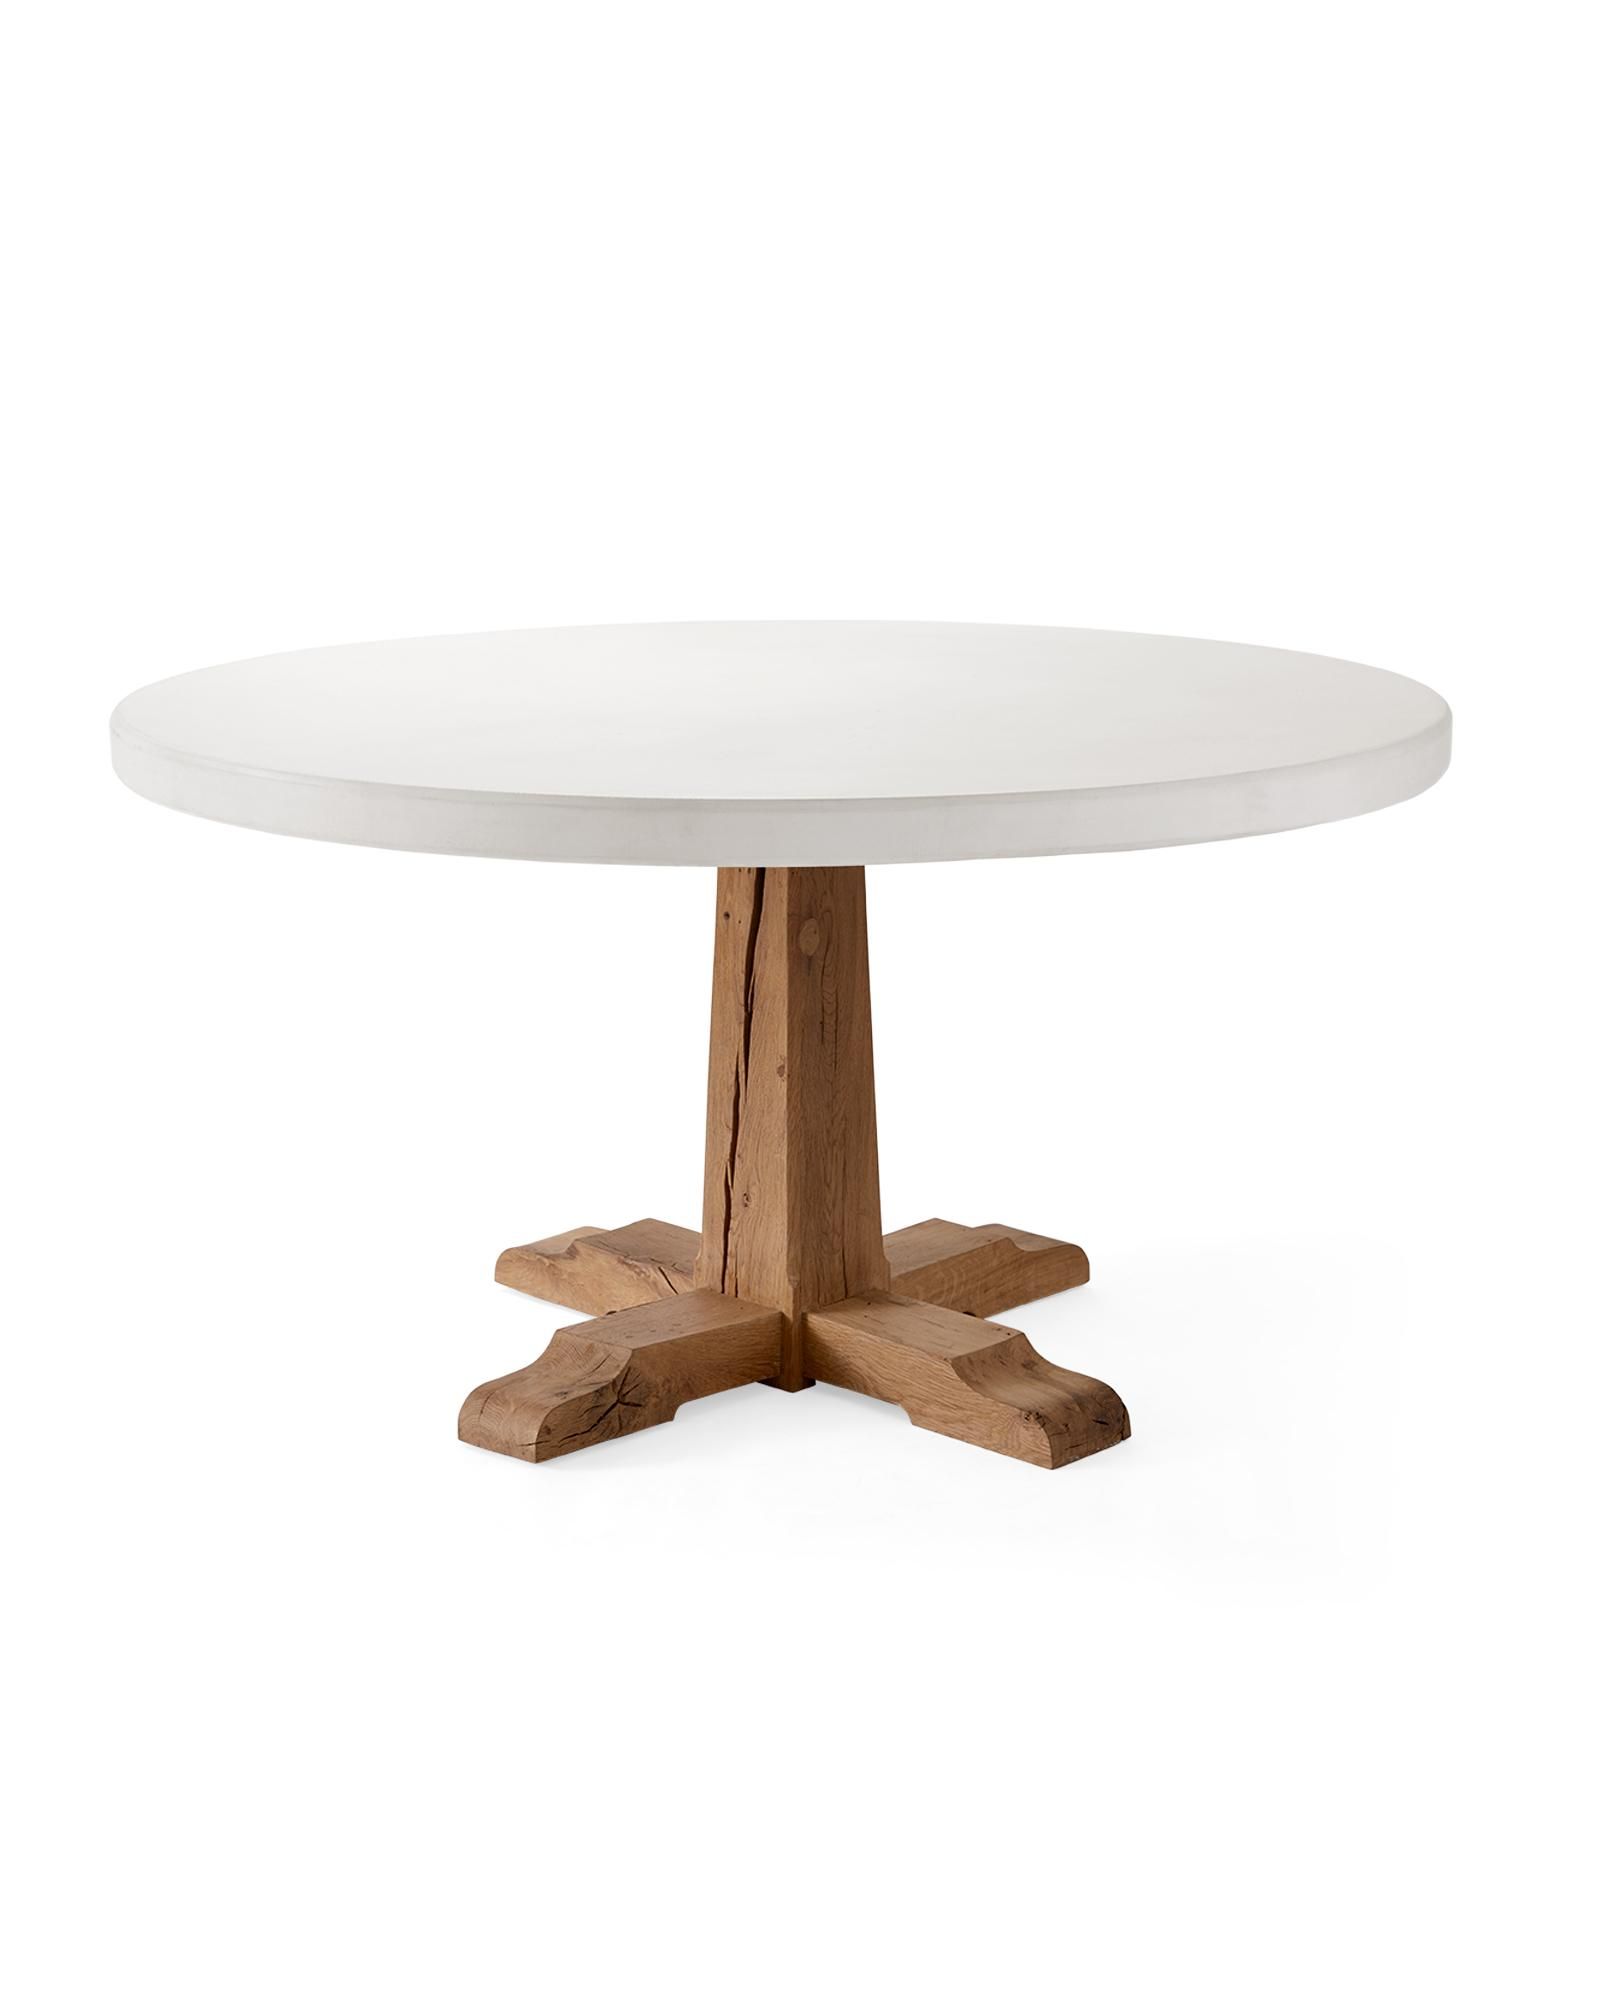 Bolinas Round Dining Table | Serena and Lily